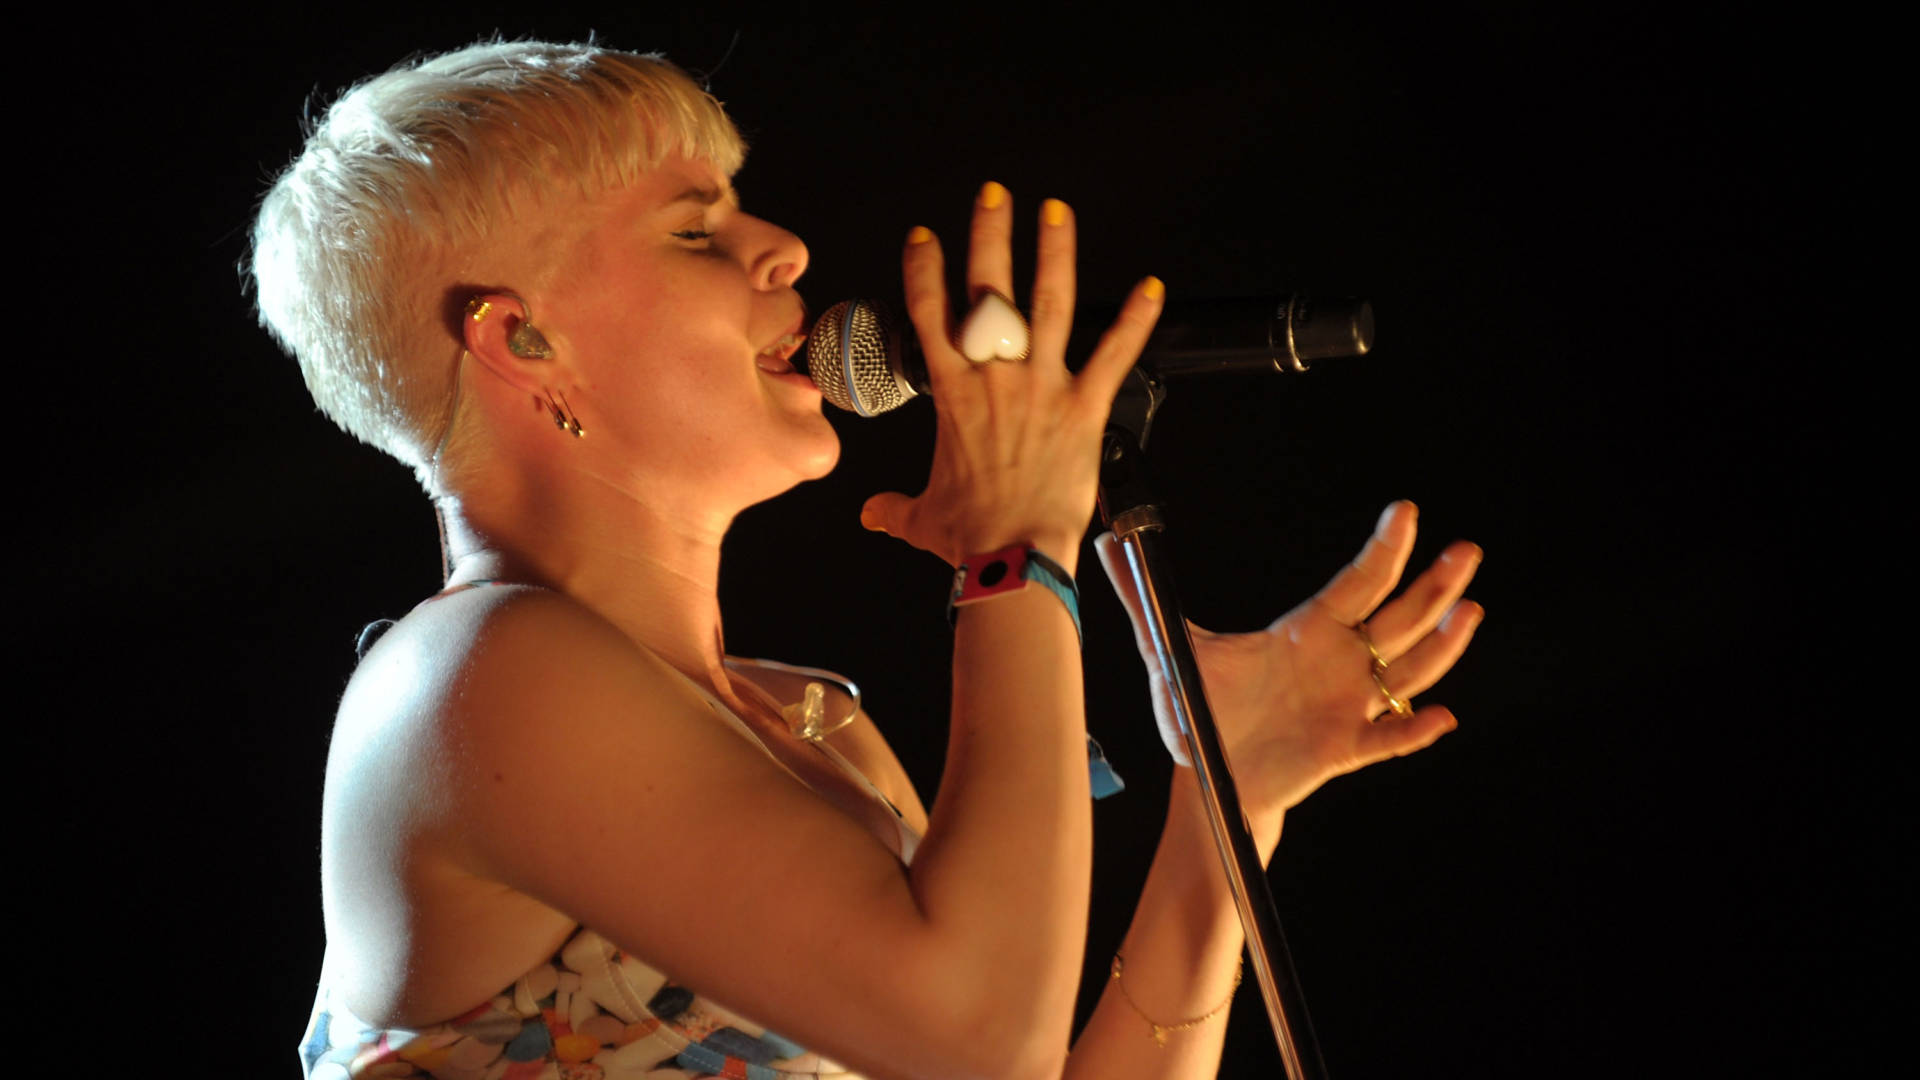 Robyn at Coachella in 2011.  Photo by Charley Gallay/Getty Images